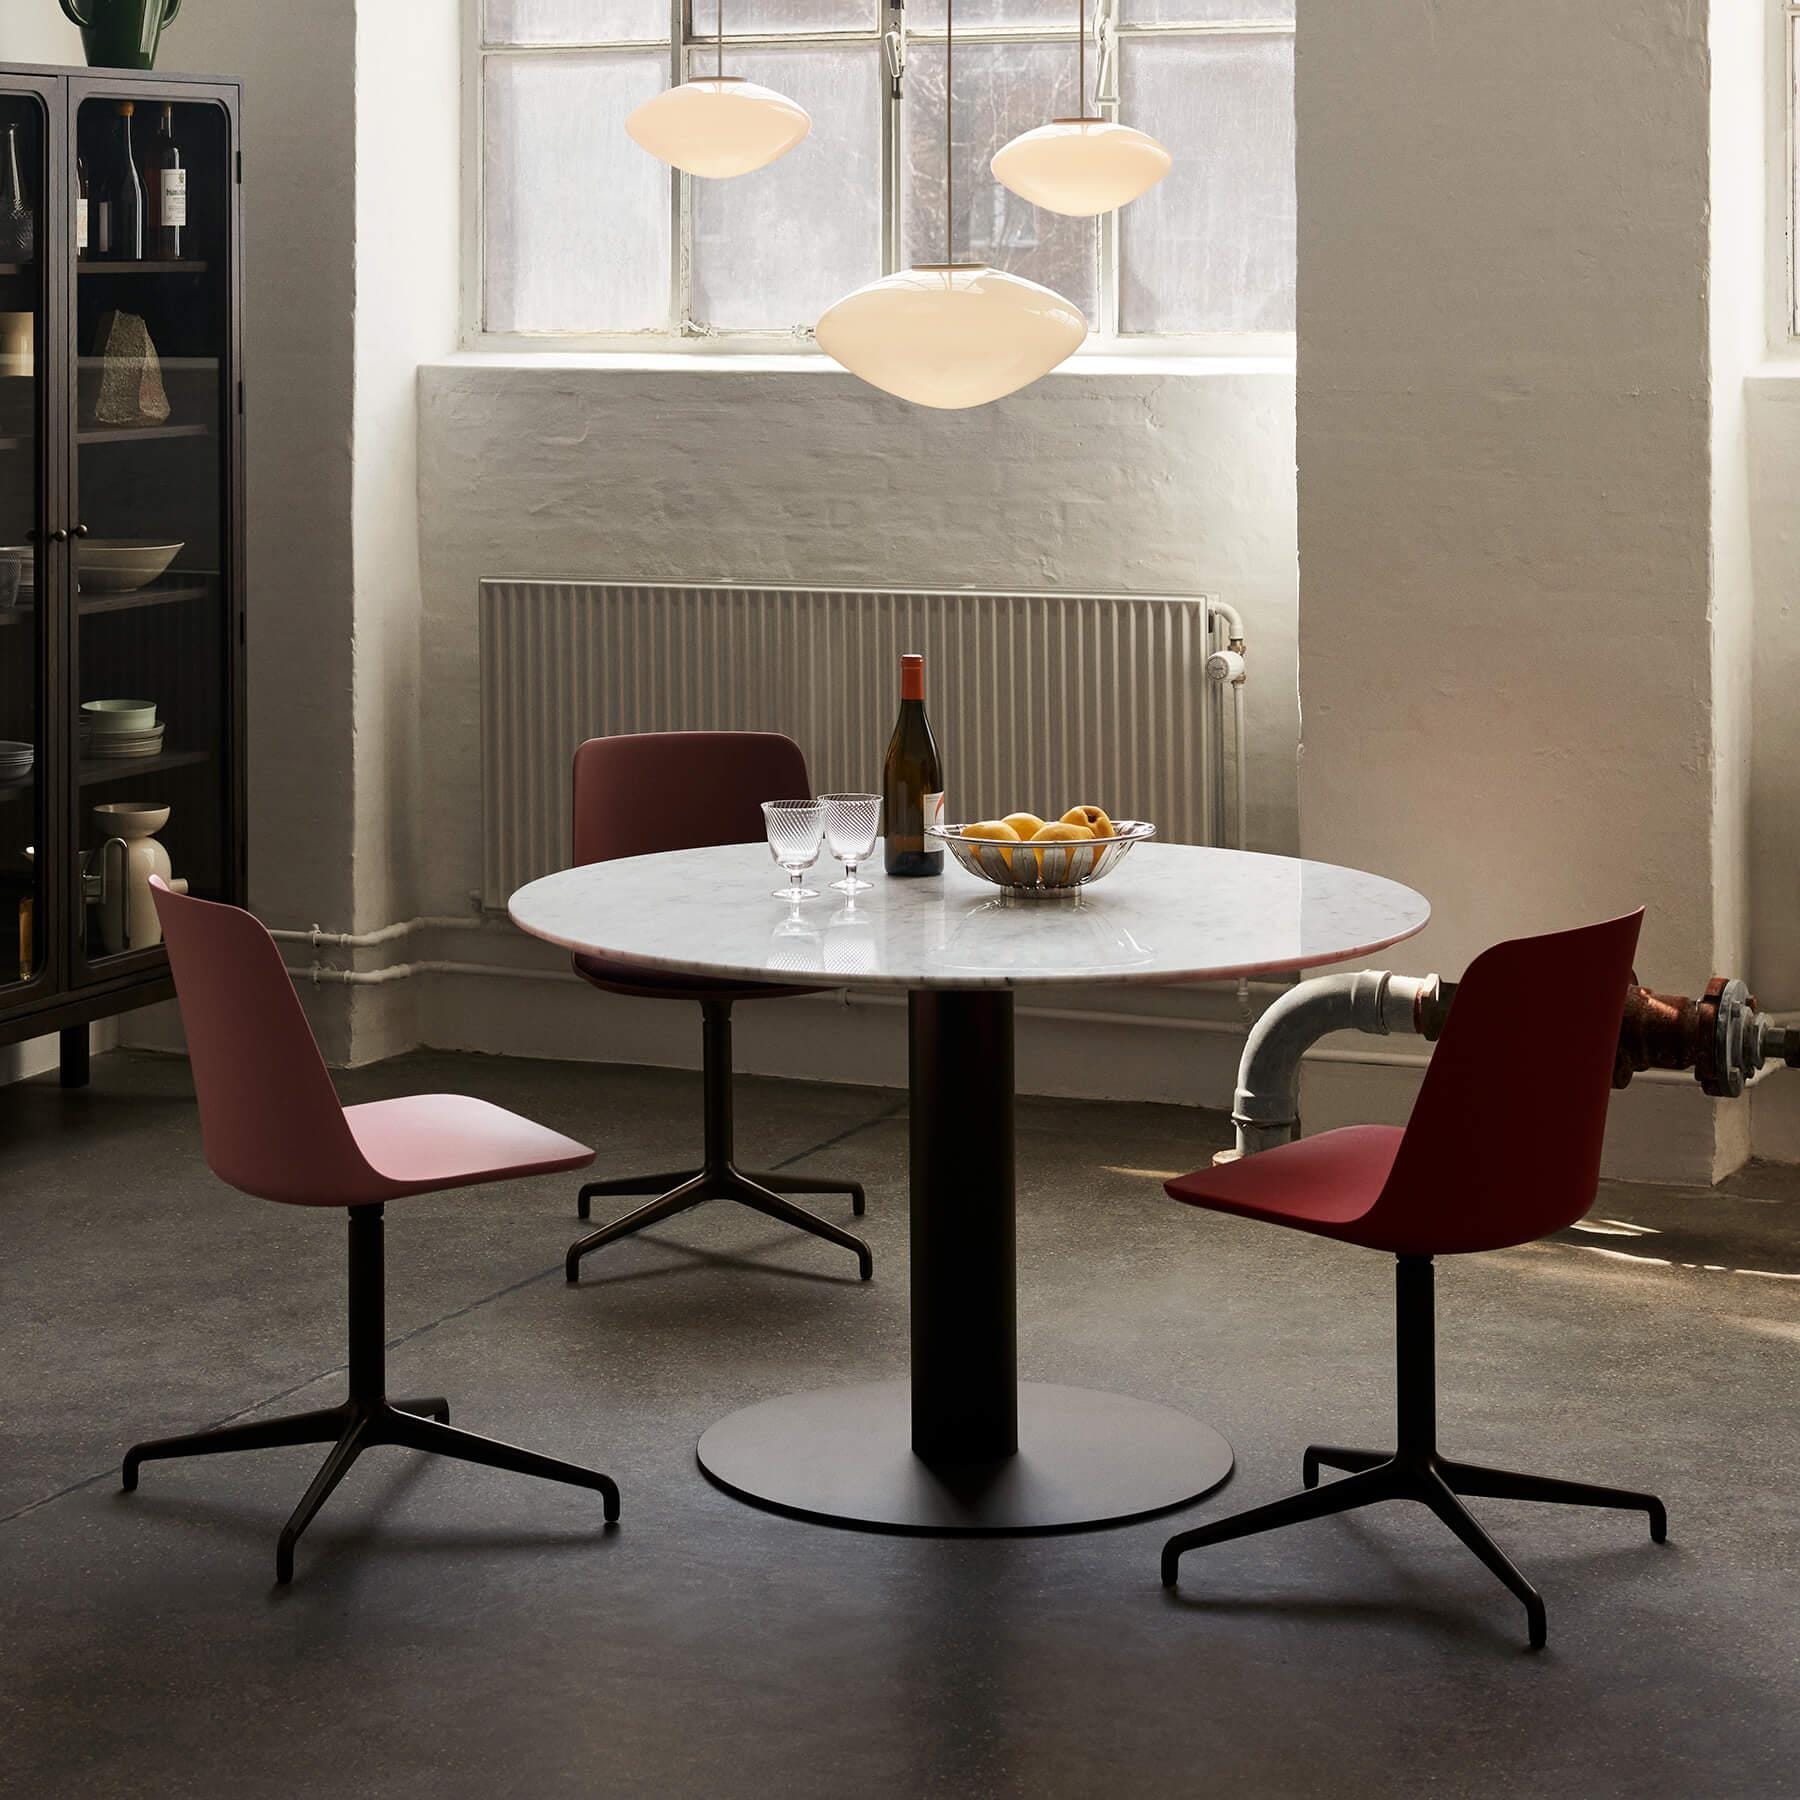 Tradition In Between Sk19 And Rely Hw11 Chair Dining Bundle Nero Marquina Table Top Red Brown Seat Multi Designer Furniture From Holloways Of Ludl